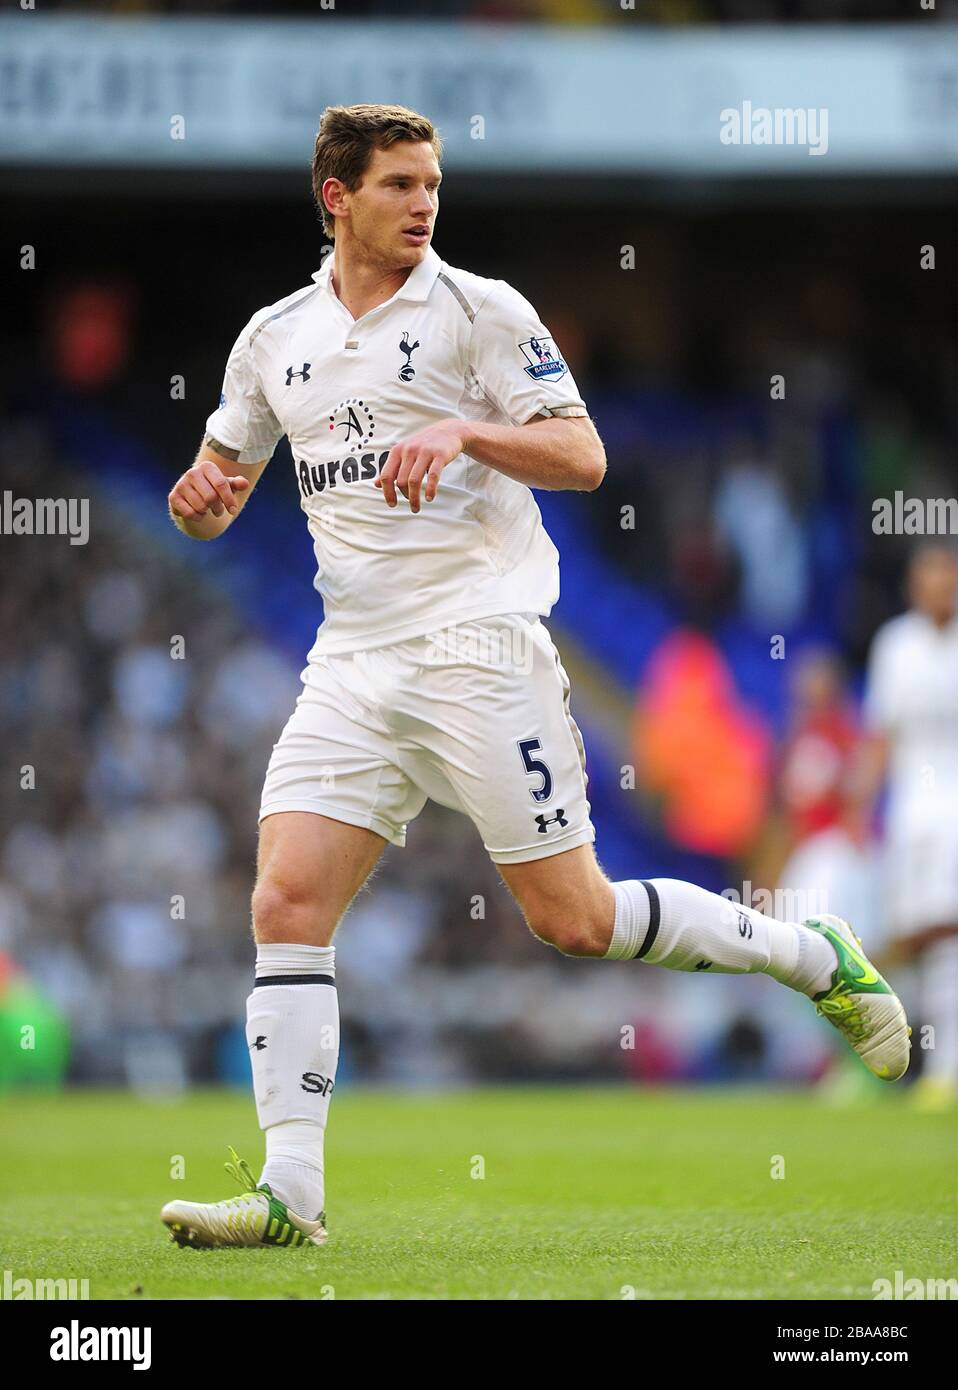 Jan Vertonghen of Anderlecht in action with the ball during the News  Photo - Getty Images